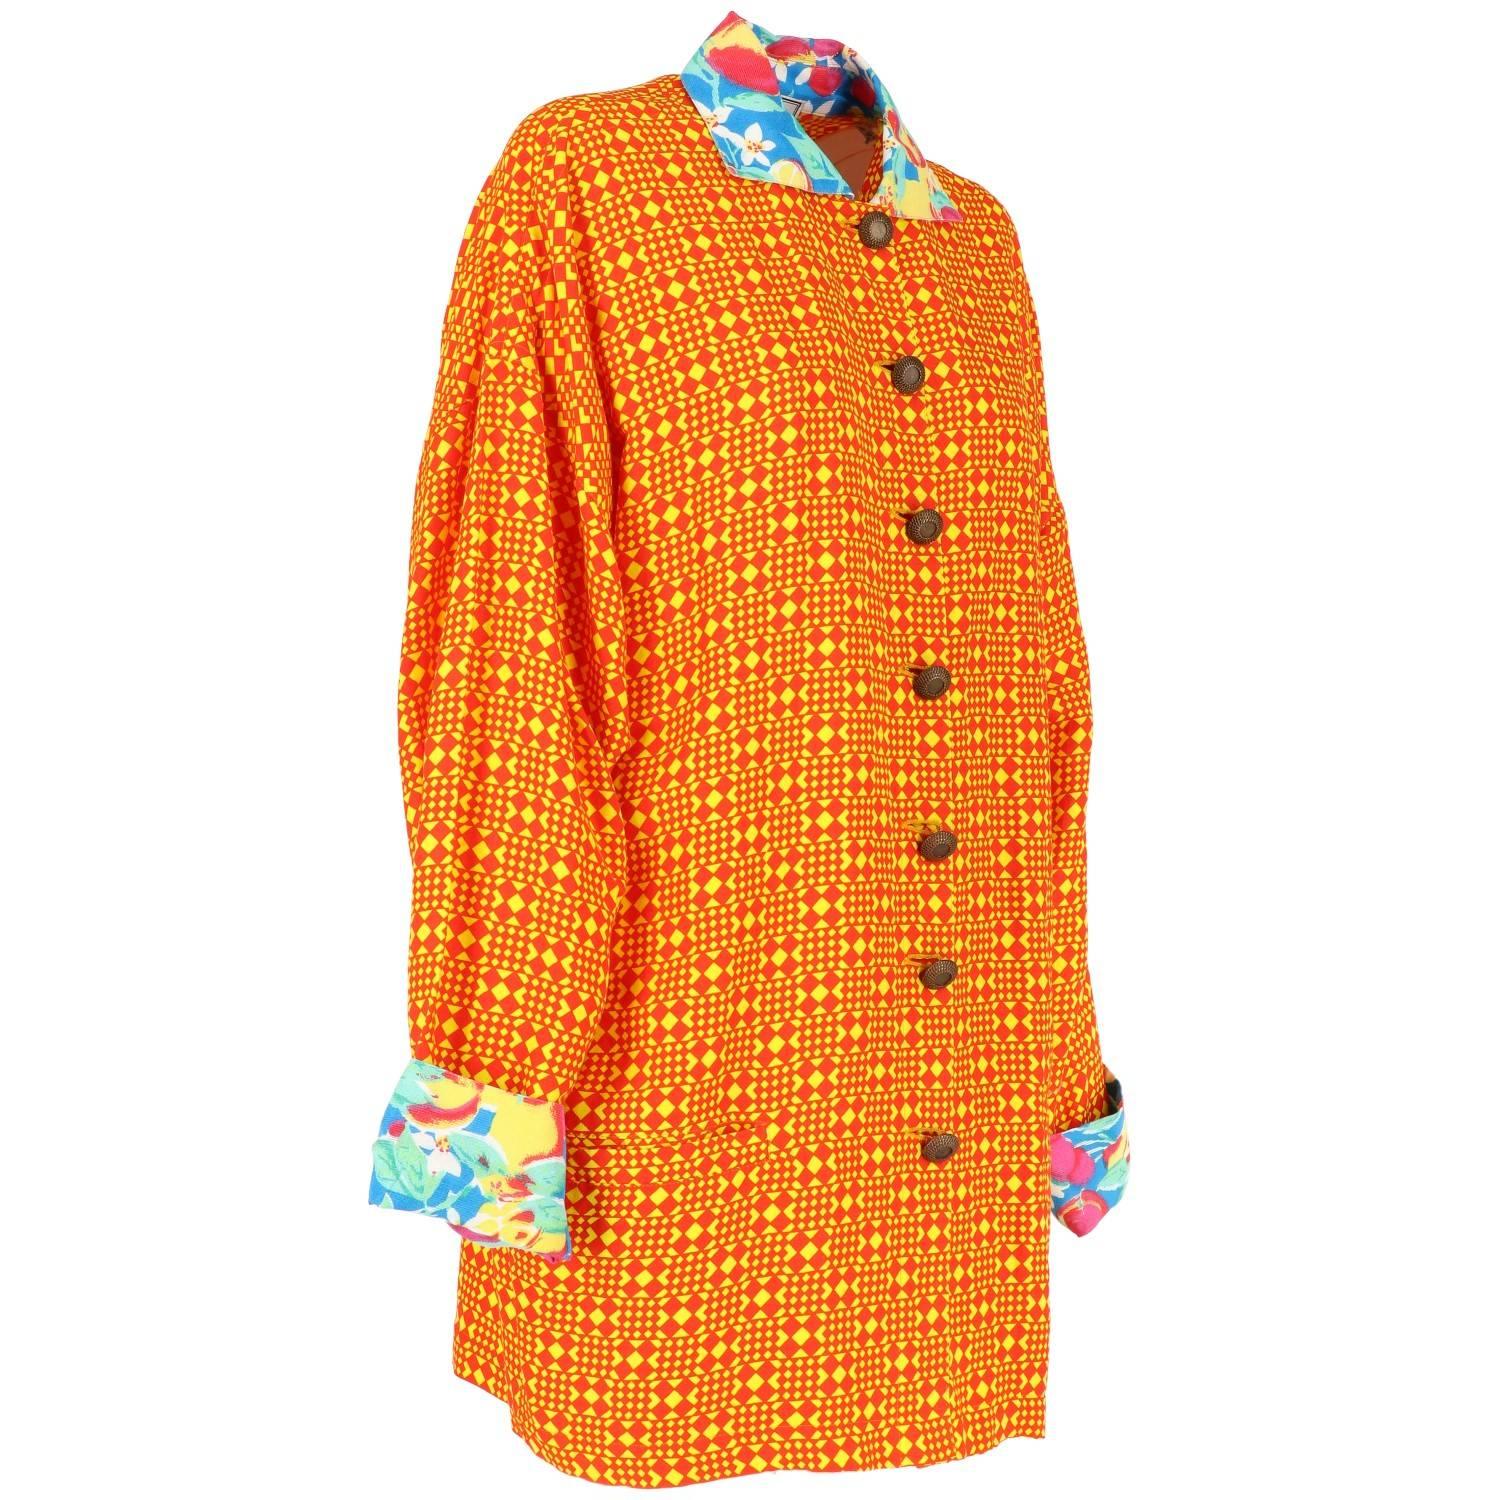 Vivid red and yellow cotton blend oversized Versace jacket. It features a geometric pattern, classic collar,  front buttons fastening, long sleeves and contrasting printed collar and cuffs. The item was produced in the 80s and it's vintage, in very